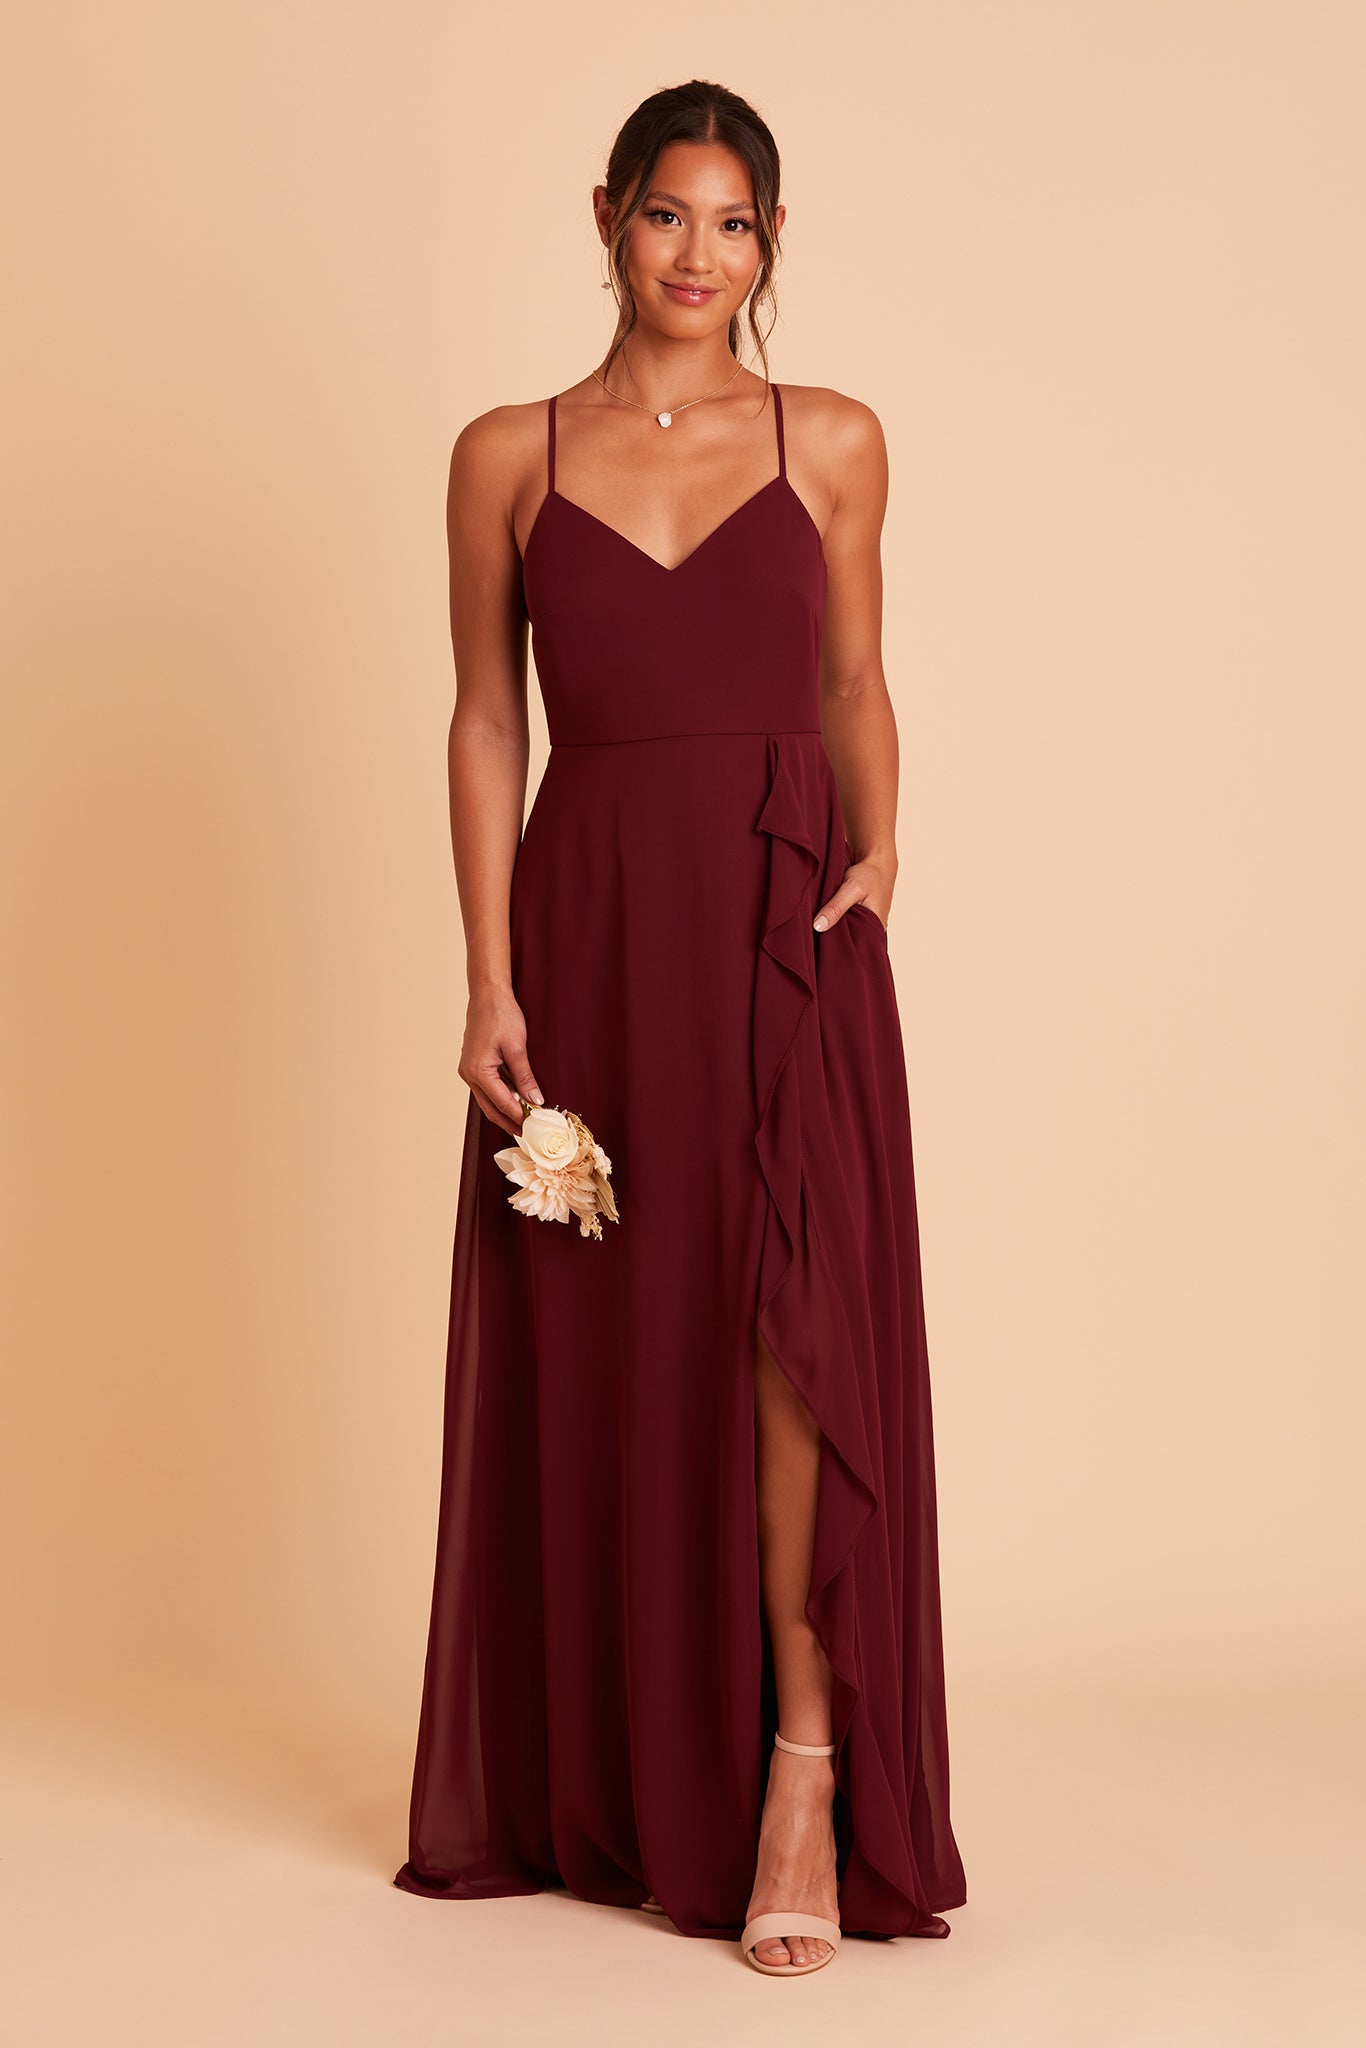 Theresa bridesmaid dress with slit in cabernet burgundy chiffon by Birdy Grey, hand in pocket, front view